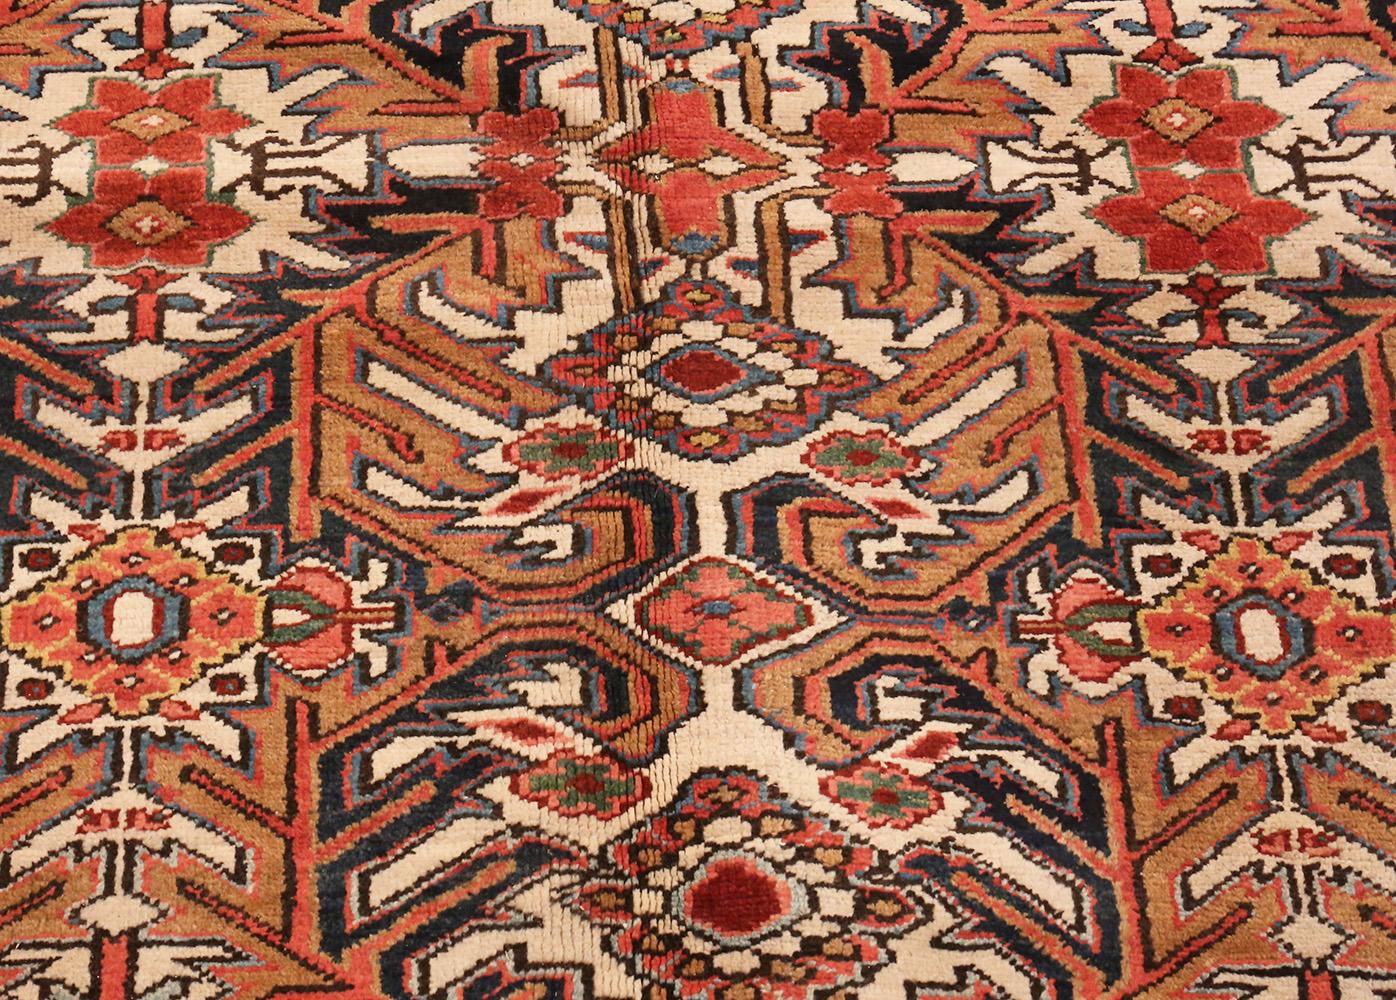 This awe-inspiring antique Persian Heriz carpet displays a host of powerful angular decorations arranged in a sophisticated all-over repeating pattern that retains a rustic village-like appearance. The same angular features that give regional